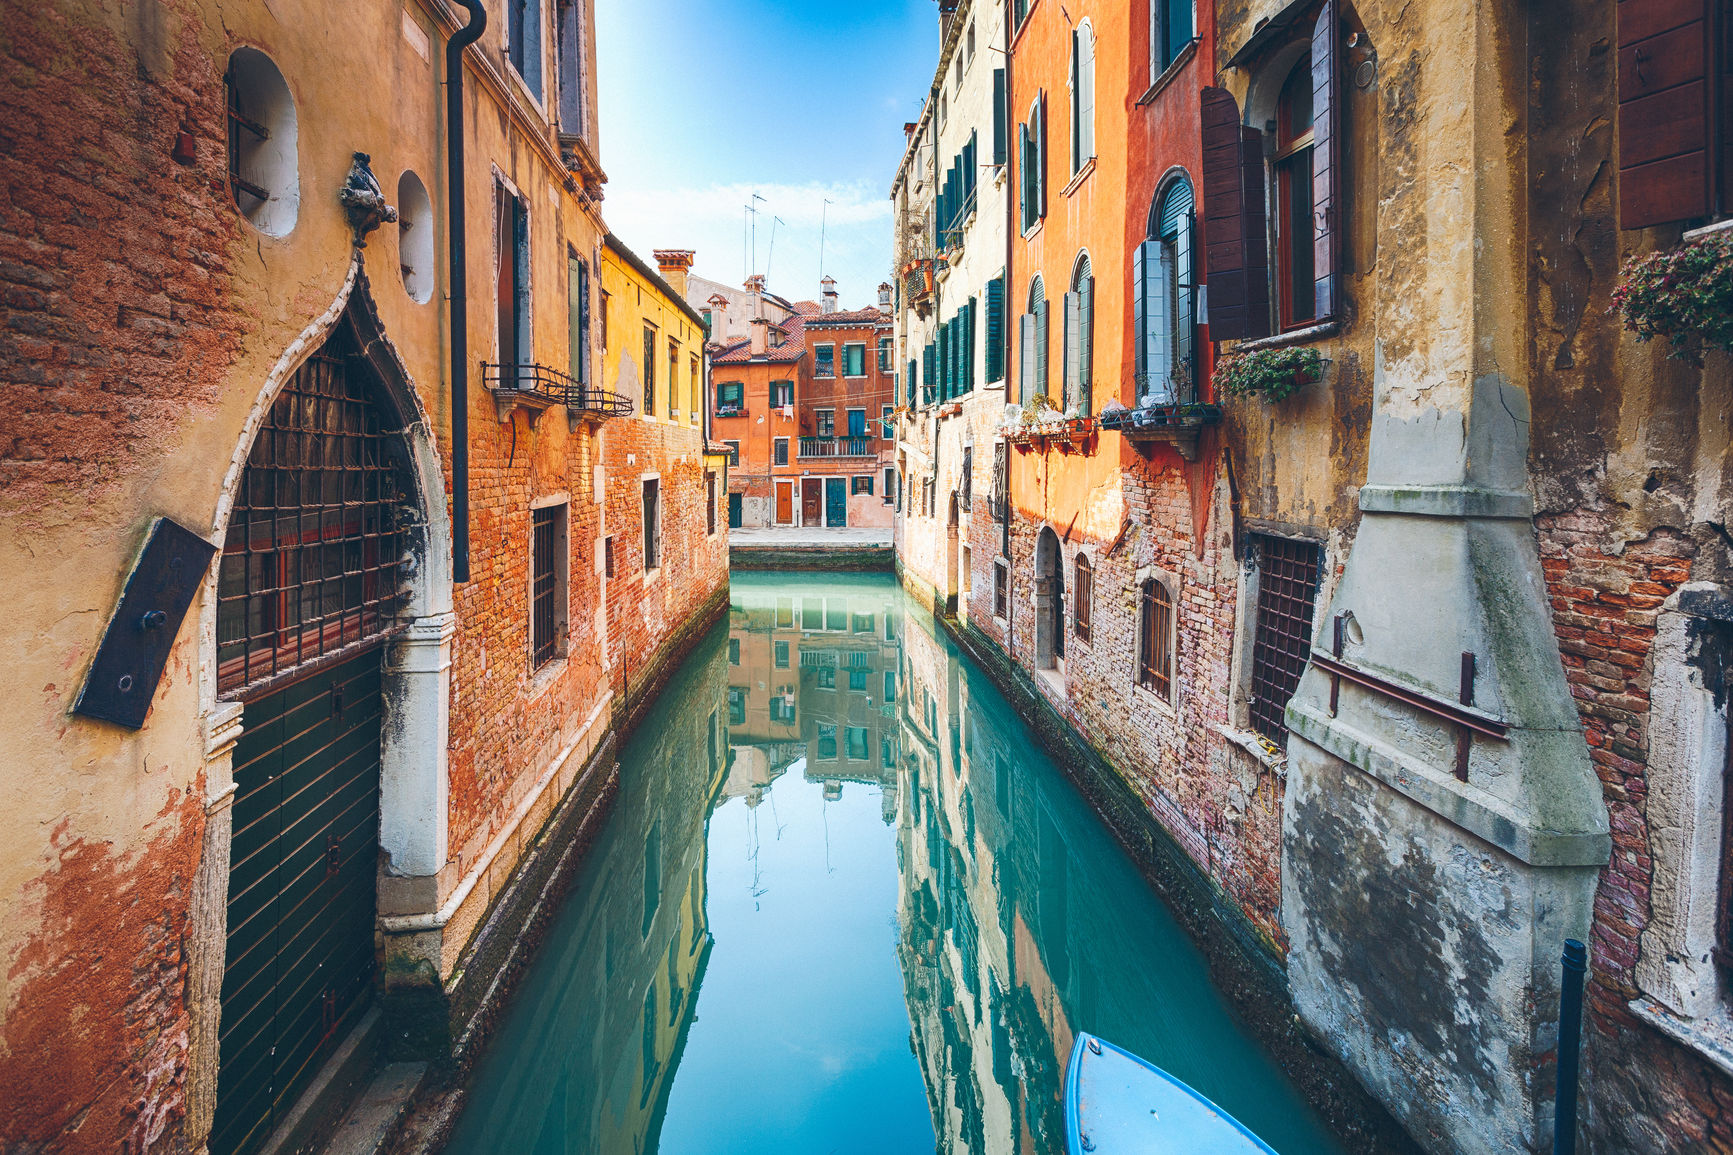 Colorful canal in Venice, Italy